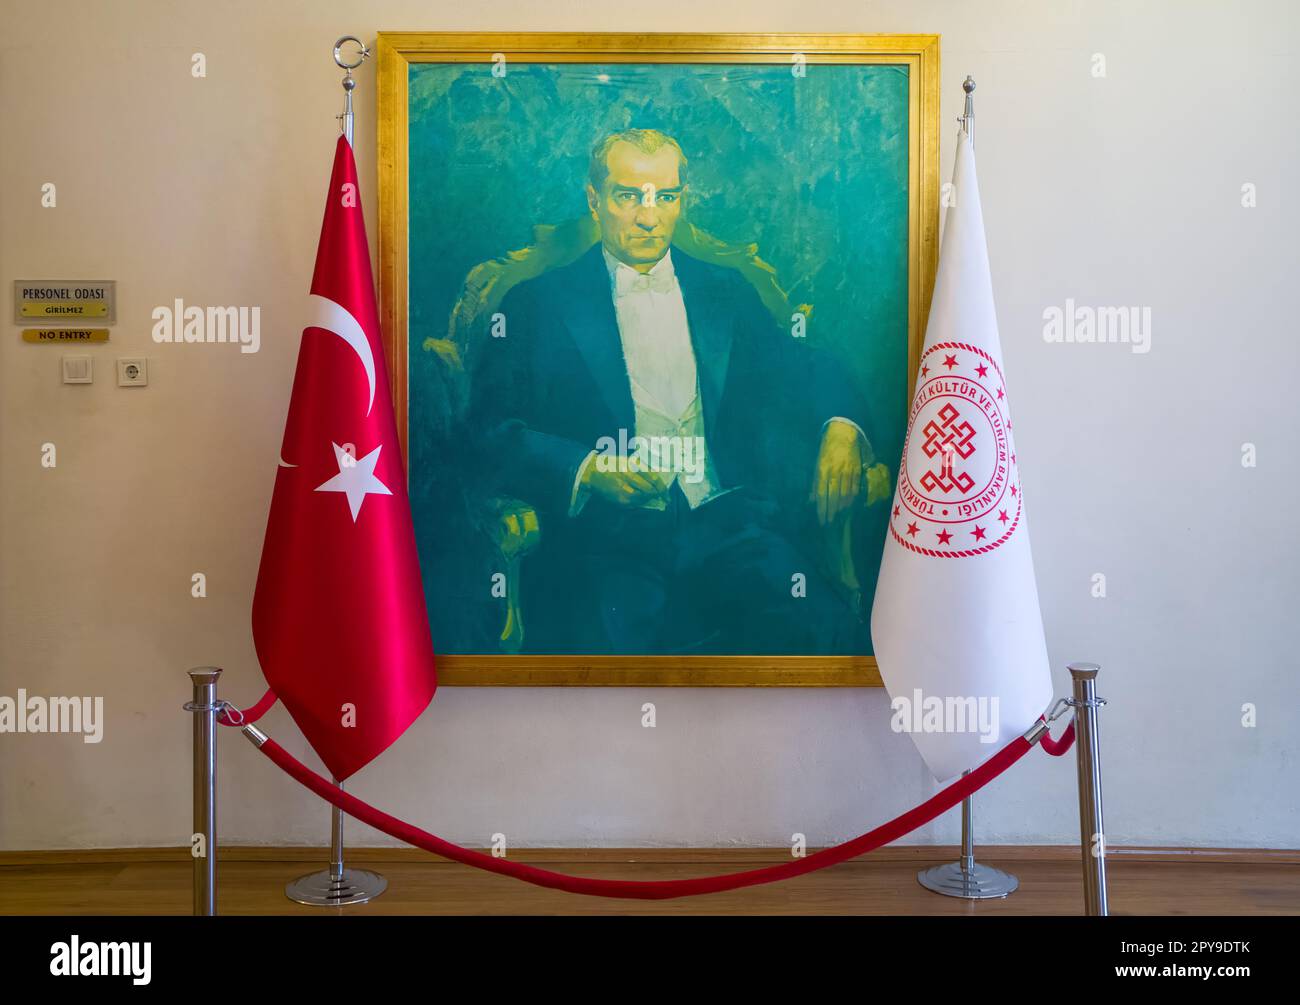 A powerful and inspiring portrait of Mustafa Kemal Ataturk, the revered founder and first president of modern Turkey, flanked by the Turkish national Stock Photo